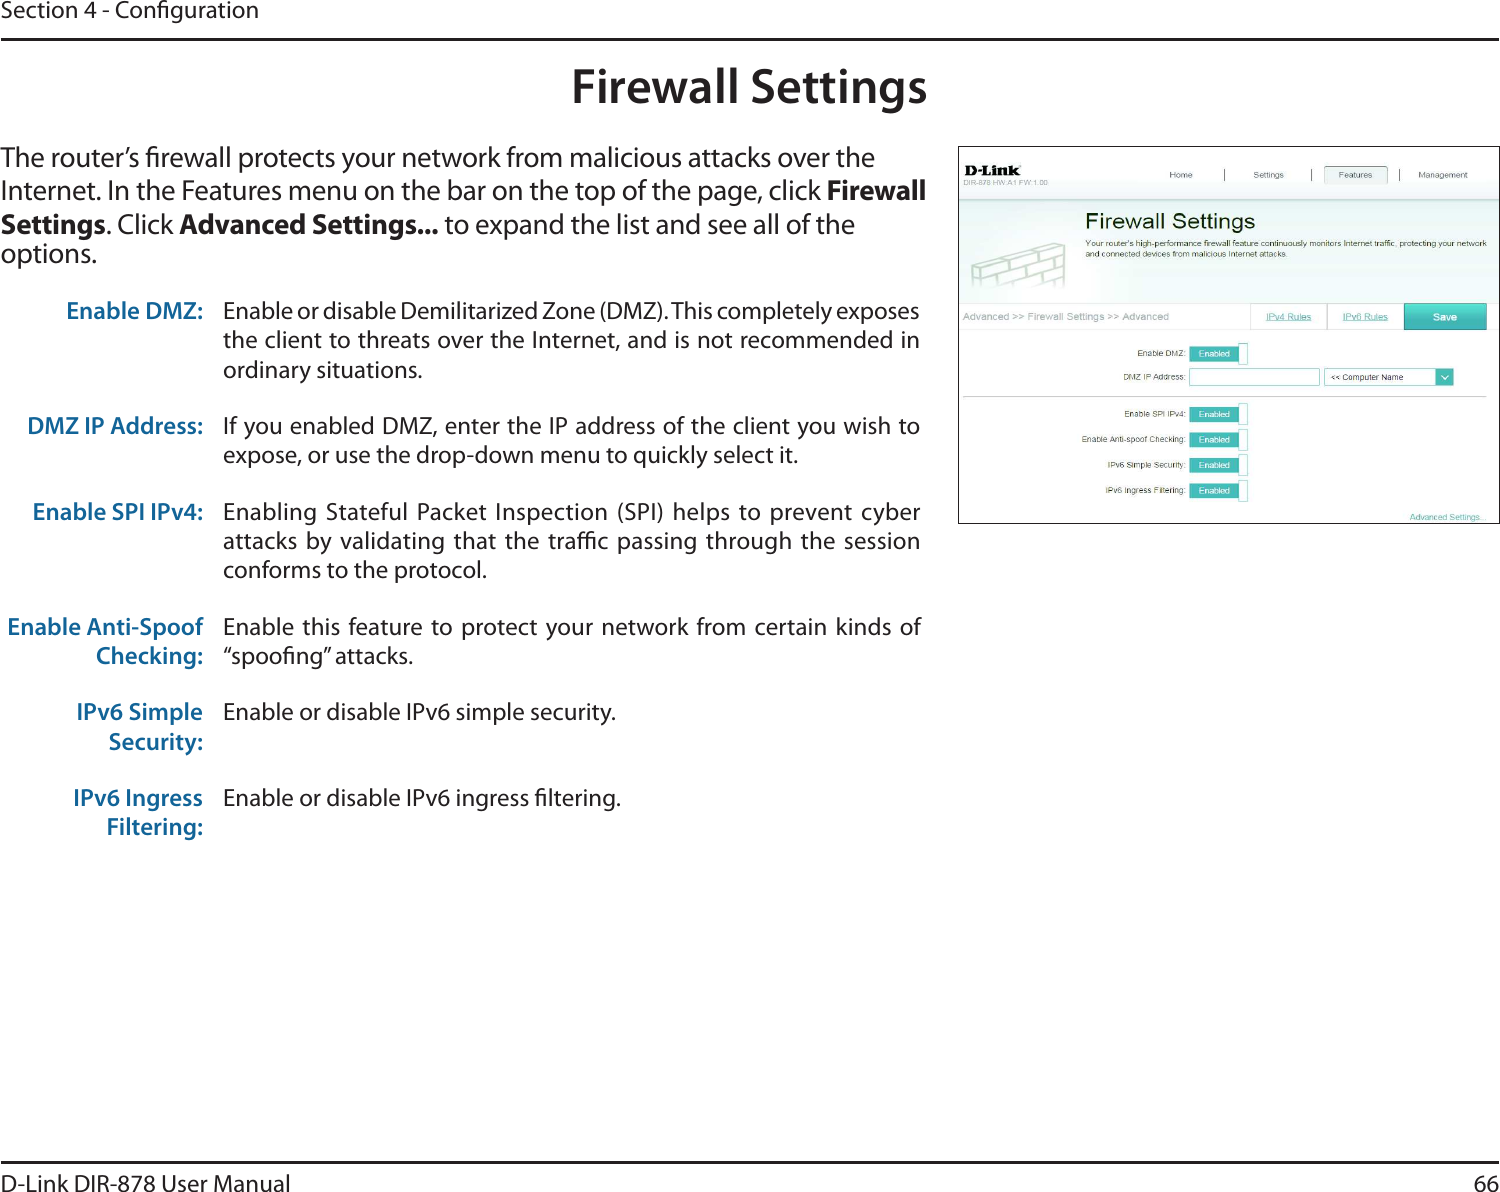 66D-Link DIR-878 User ManualSection 4 - CongurationFirewall SettingsThe router’s rewall protects your network from malicious attacks over the Internet. In the Features menu on the bar on the top of the page, click &apos;JSFXBMMSettings. Click &quot;EWBODFE4FUUJOHT to expand the list and see all of the options. Enable DMZ: Enable or disable Demilitarized Zone (DMZ). This completely exposes the client to threats over the Internet, and is not recommended in ordinary situations.DMZ IP Address: If you enabled DMZ, enter the IP address of the client you wish to expose, or use the drop-down menu to quickly select it.Enable SPI IPv4: Enabling  Stateful Packet Inspection  (SPI) helps to prevent  cyber attacks by  validating that the trac passing  through the session conforms to the protocol.Enable Anti-Spoof Checking:Enable this feature to protect your network from certain kinds of iTQPPöOHwBUUBDLTIPv6 Simple Security:Enable or disable IPv6 simple security.IPv6 Ingress Filtering:Enable or disable IPv6 ingress ltering.